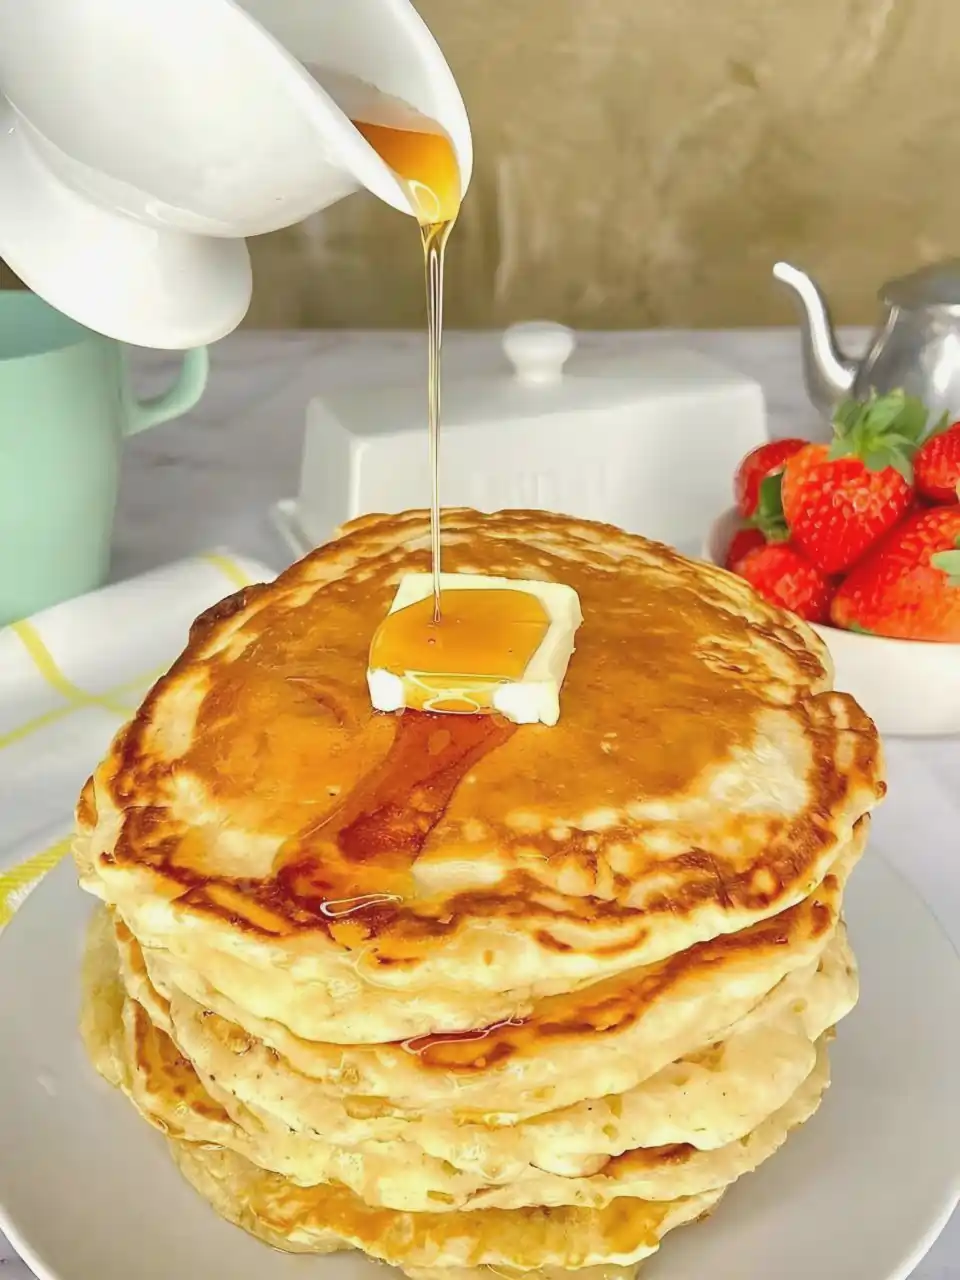 Old-Fashioned Pancakes - The Nostalgic Dish with an amazing combination of flavors - Ready to Eat within 30 minutes!